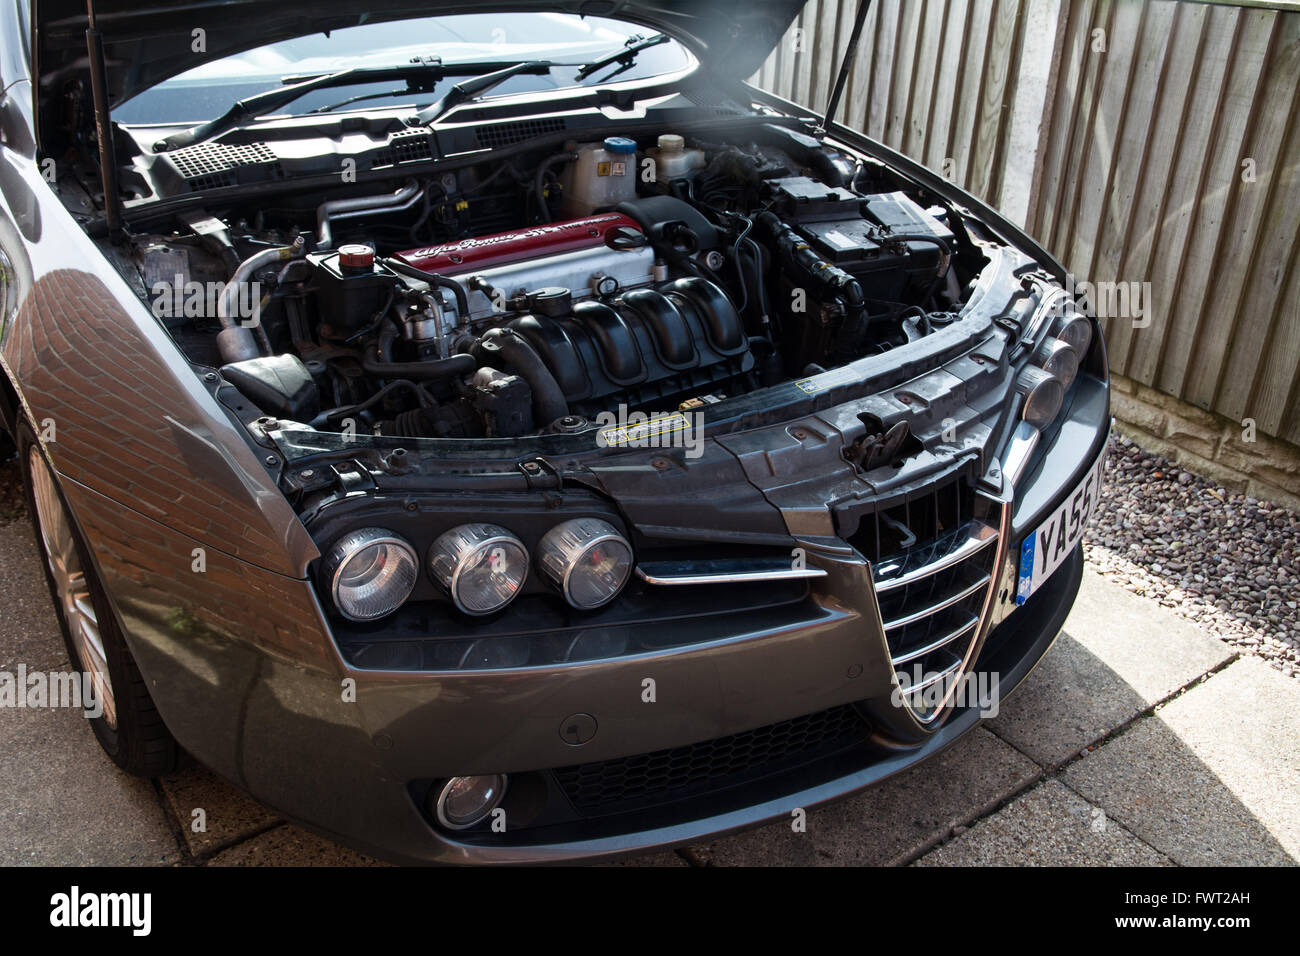 Alfa romeo 159 engine hi-res stock photography and images - Alamy